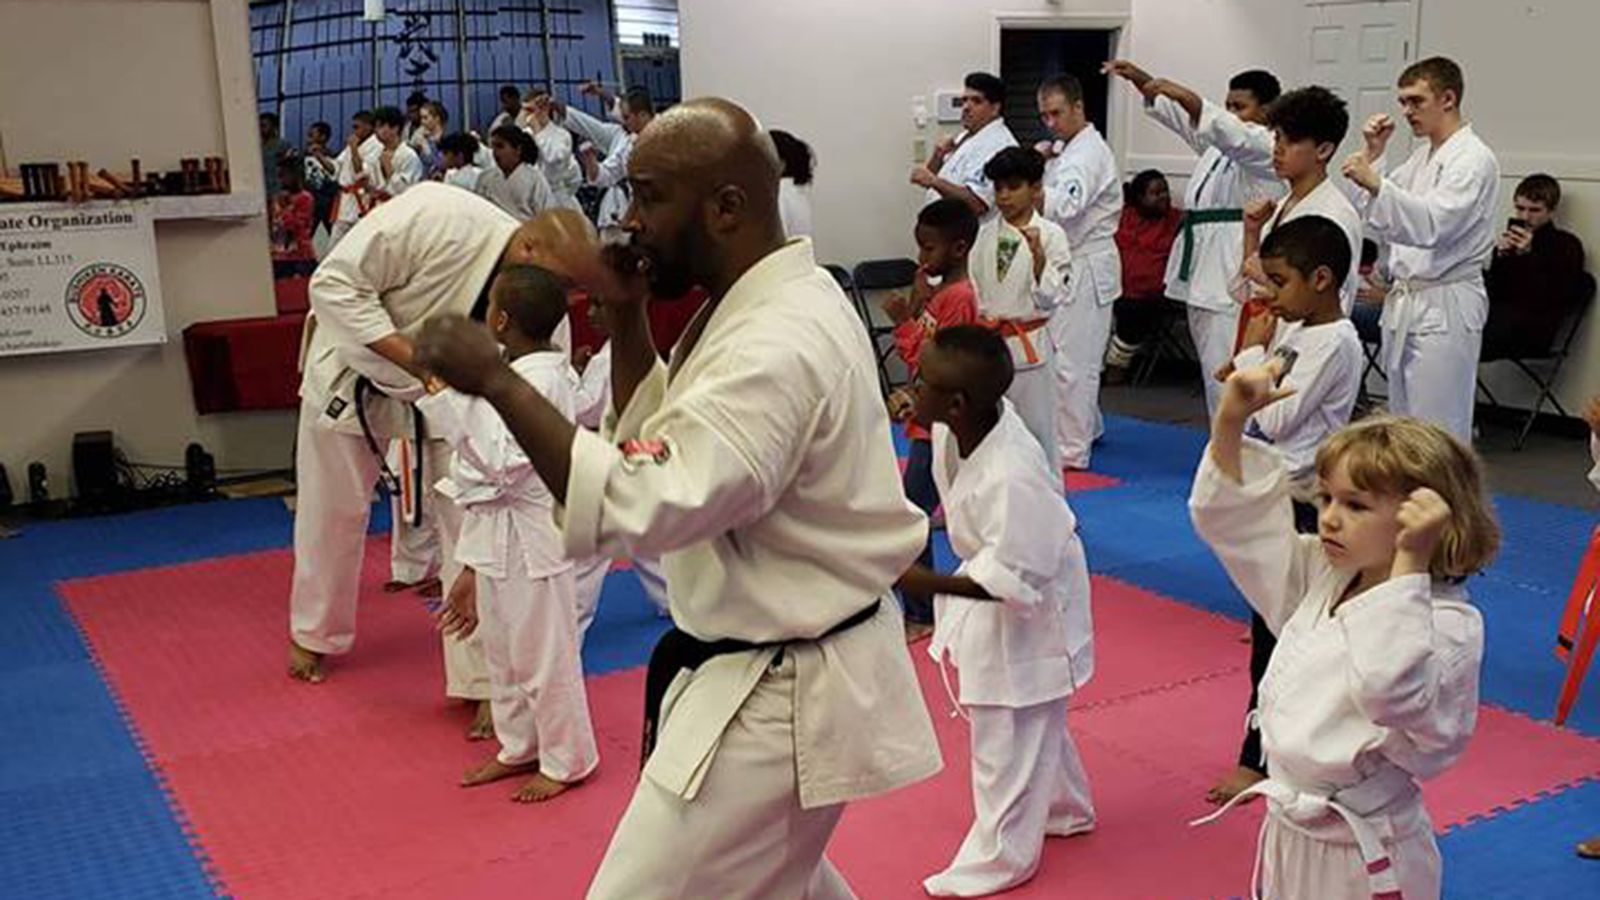 Cops say a would-be kidnapper chased a woman – into a karate studio. That was a bad move. | CNN